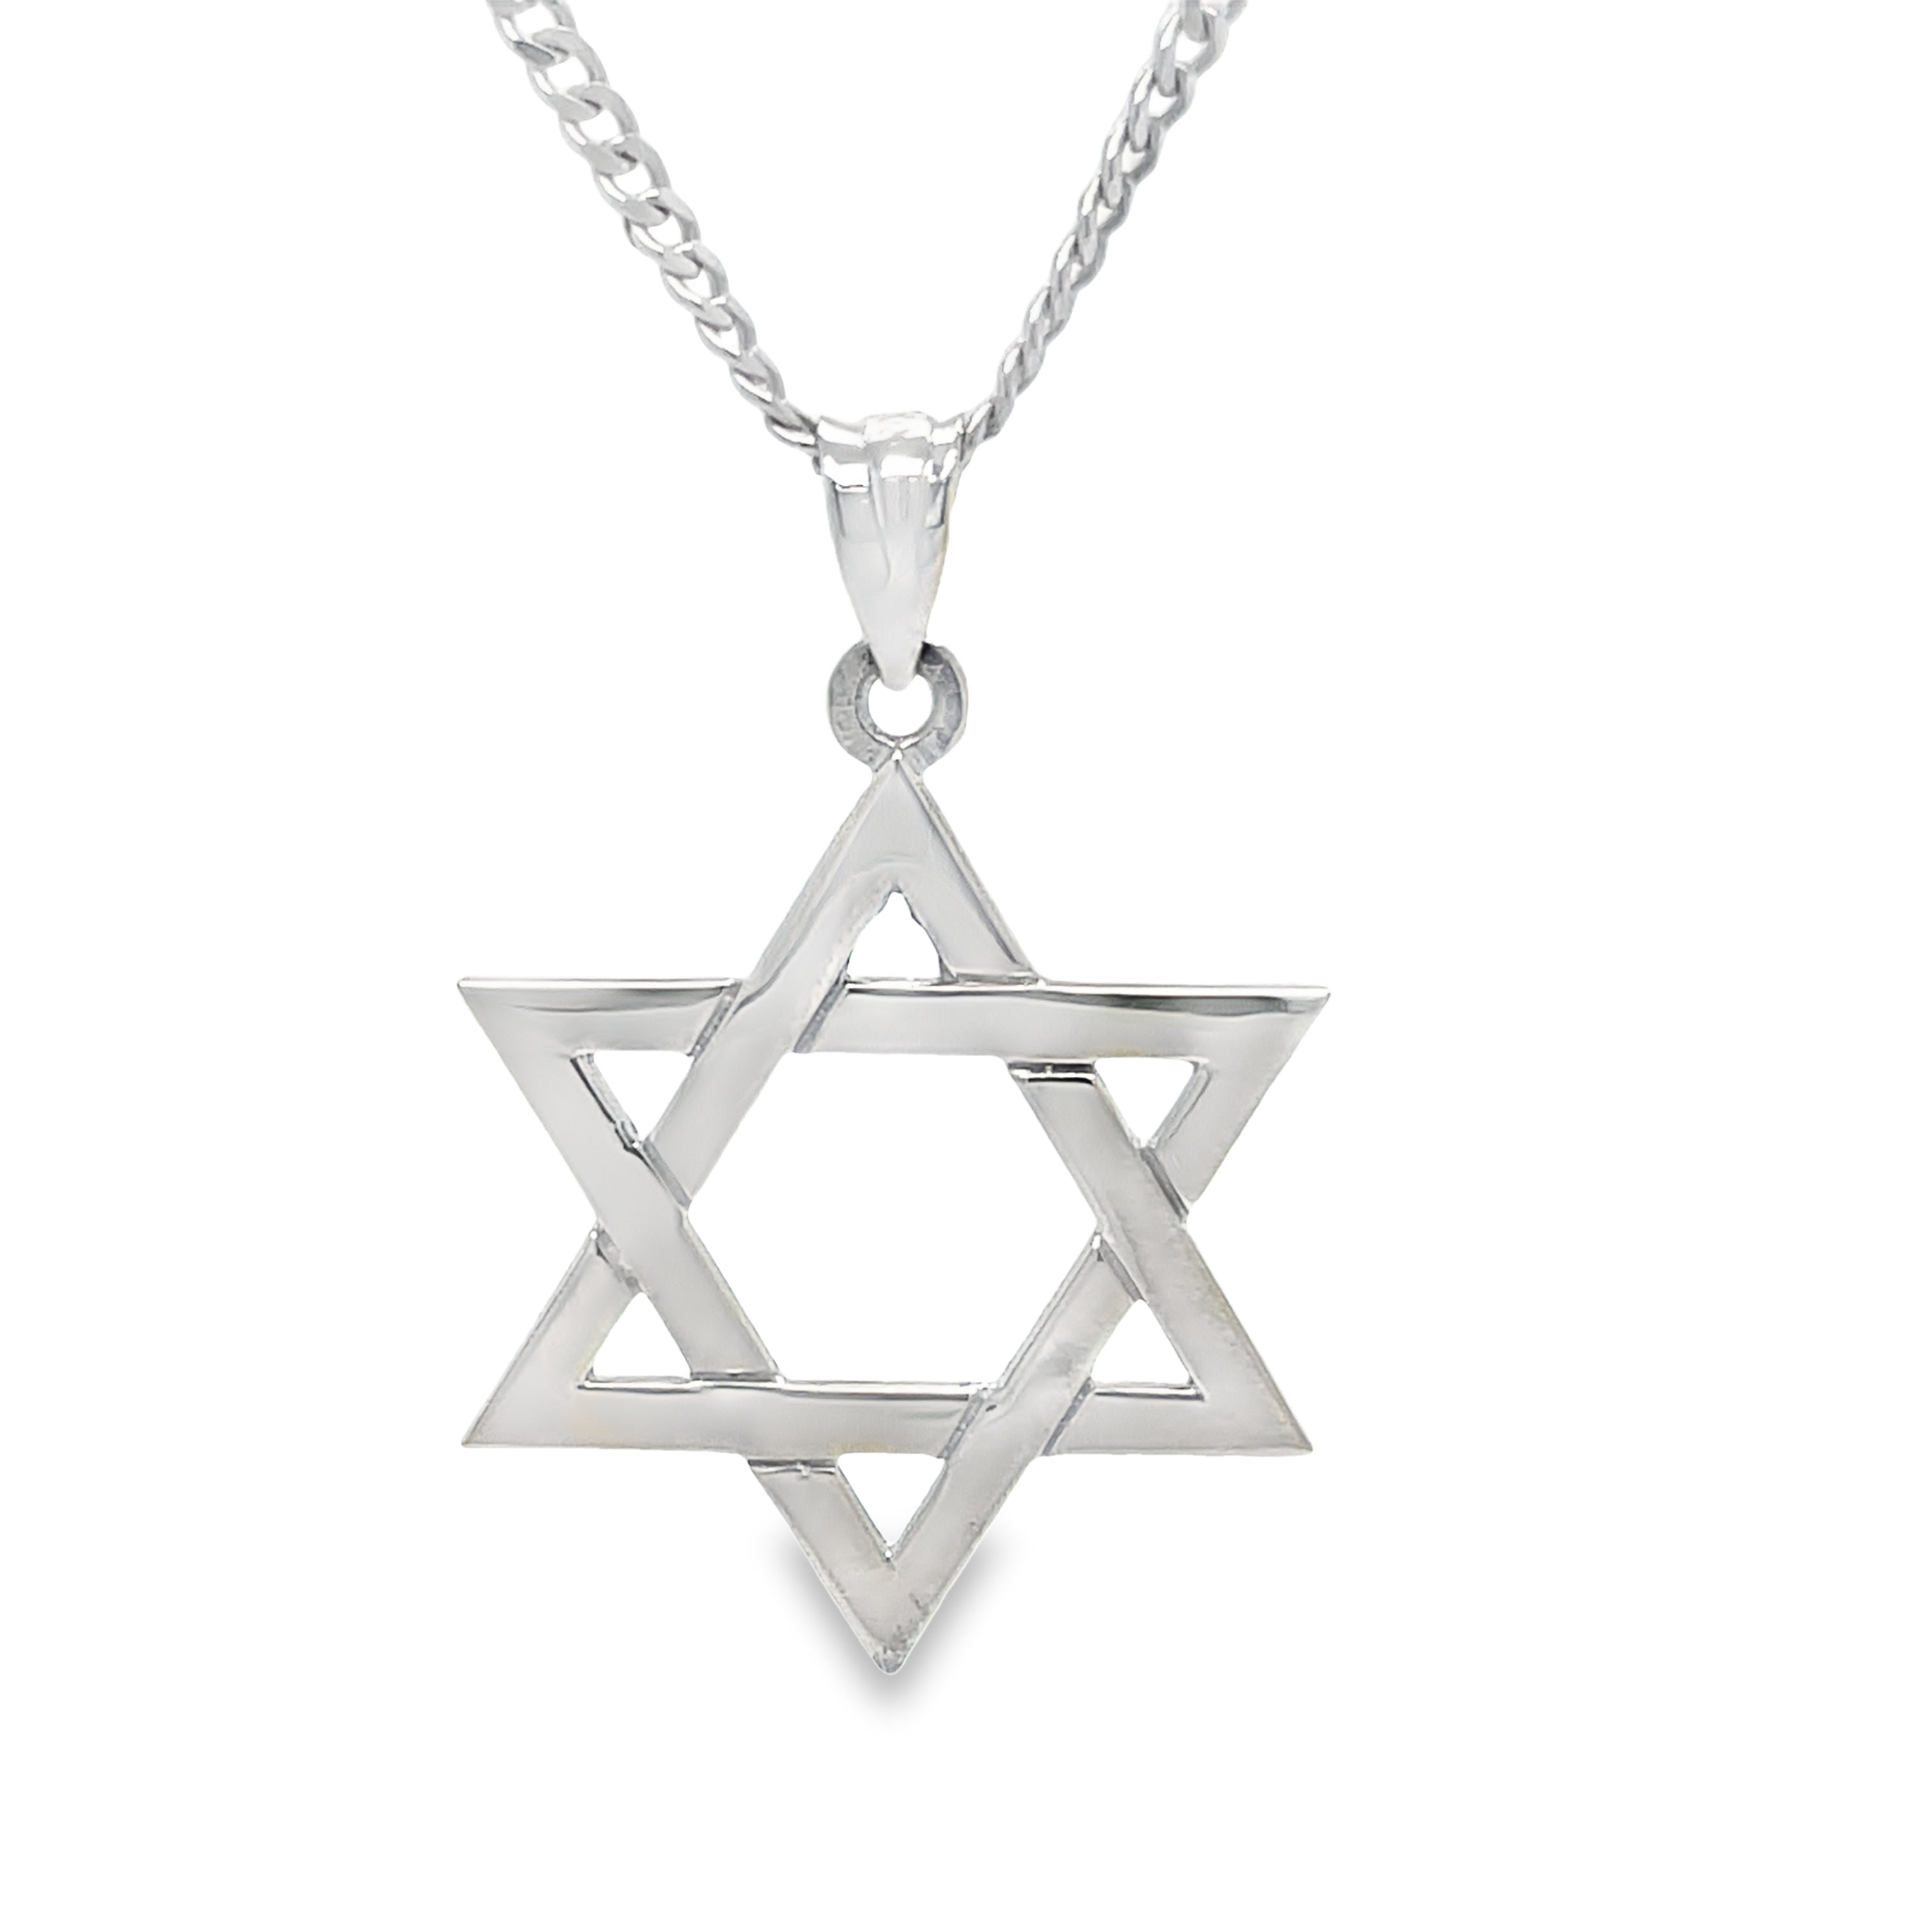 This 14K white Gold Star of David Pendant Necklace is a timeless symbol of faith and beauty. Charm measures 28.00 mm and is made with 14K white gold. Create a special look when you add the optional 18" long chain ($299) for a one-of-a-kind necklace. Feel inspired and emboldened with this stunning piece!